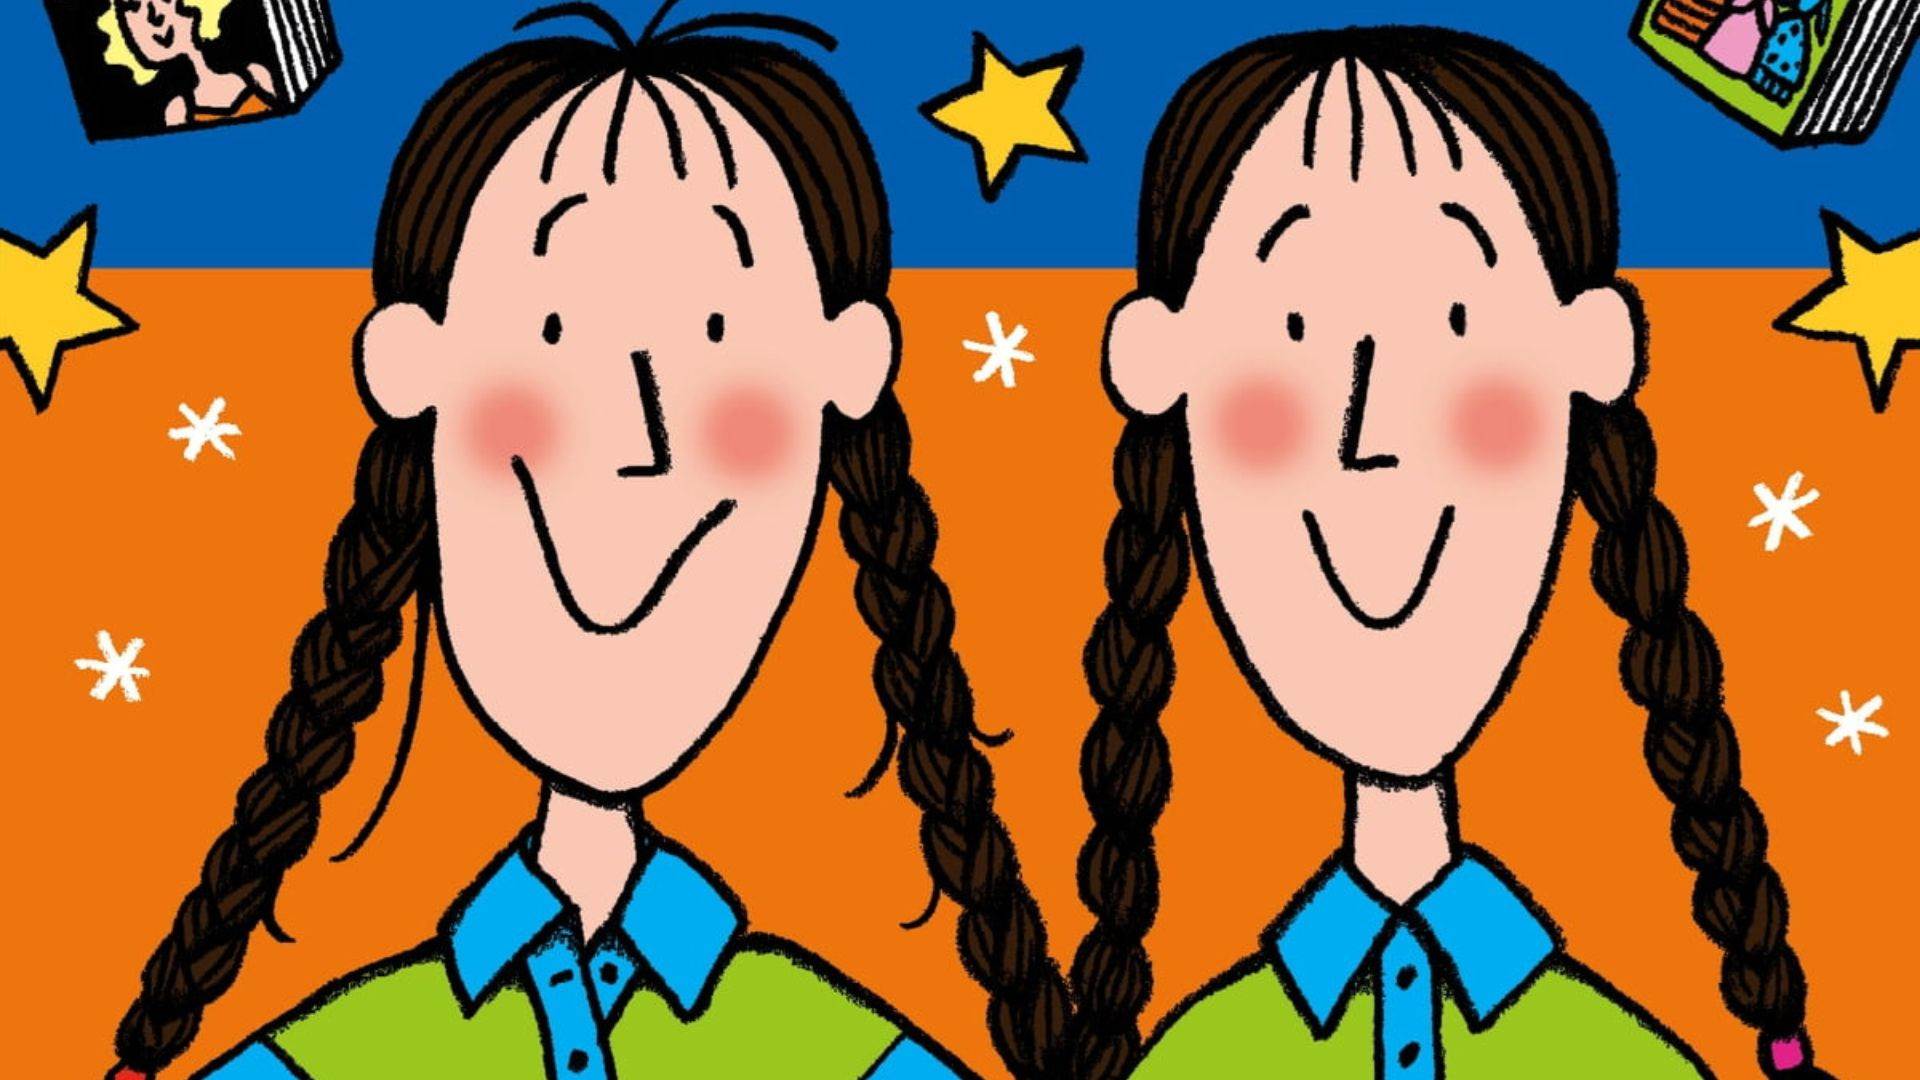 The cover of Double Act by Jacqueline Wilson and Nick Sharratt